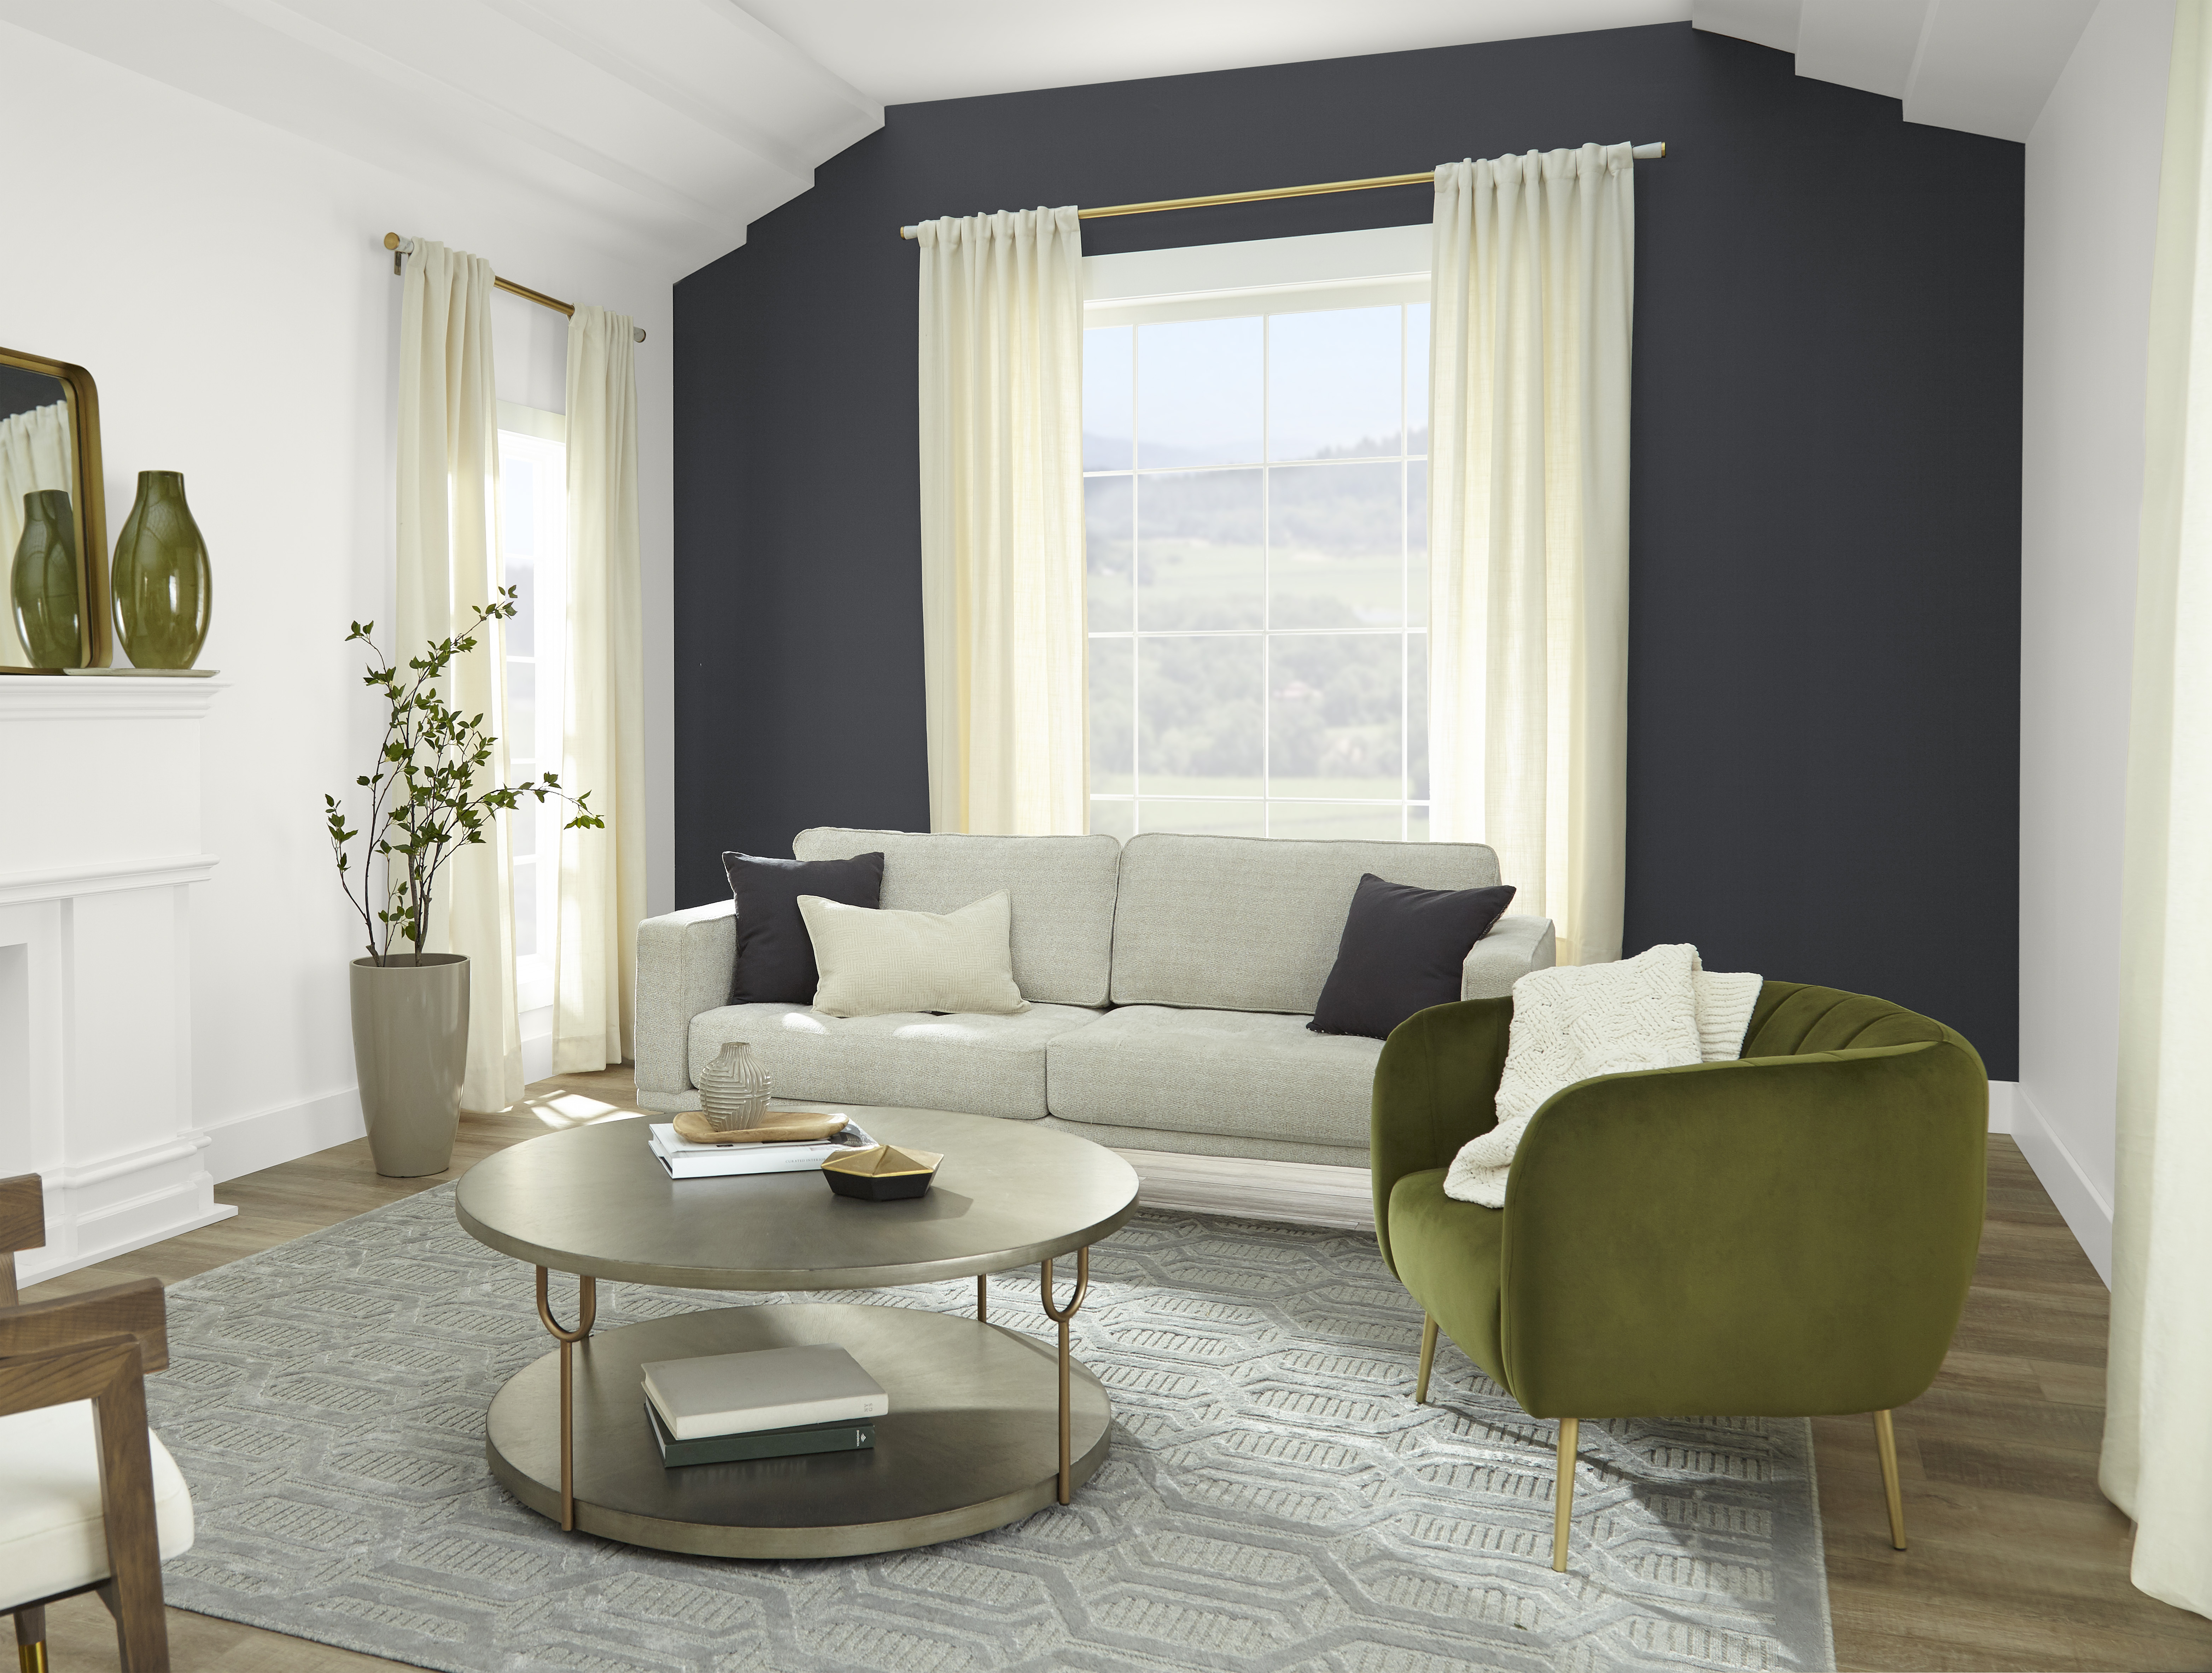 An elegant living room with white walls and ceiling, with an accent wall in the colour Cracked Pepper